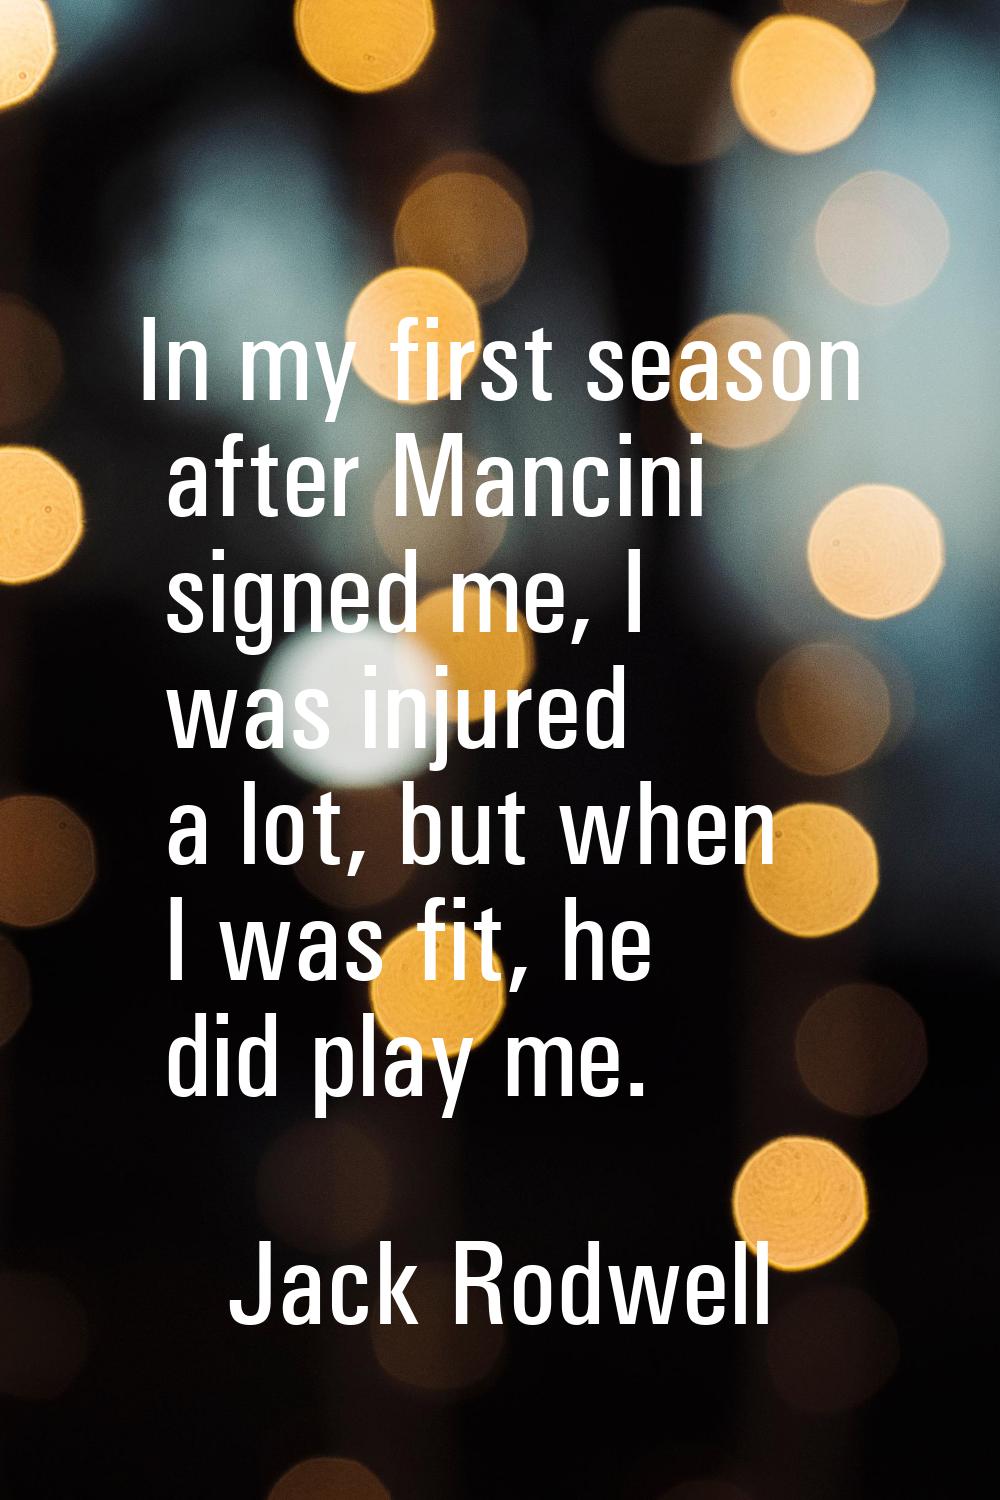 In my first season after Mancini signed me, I was injured a lot, but when I was fit, he did play me